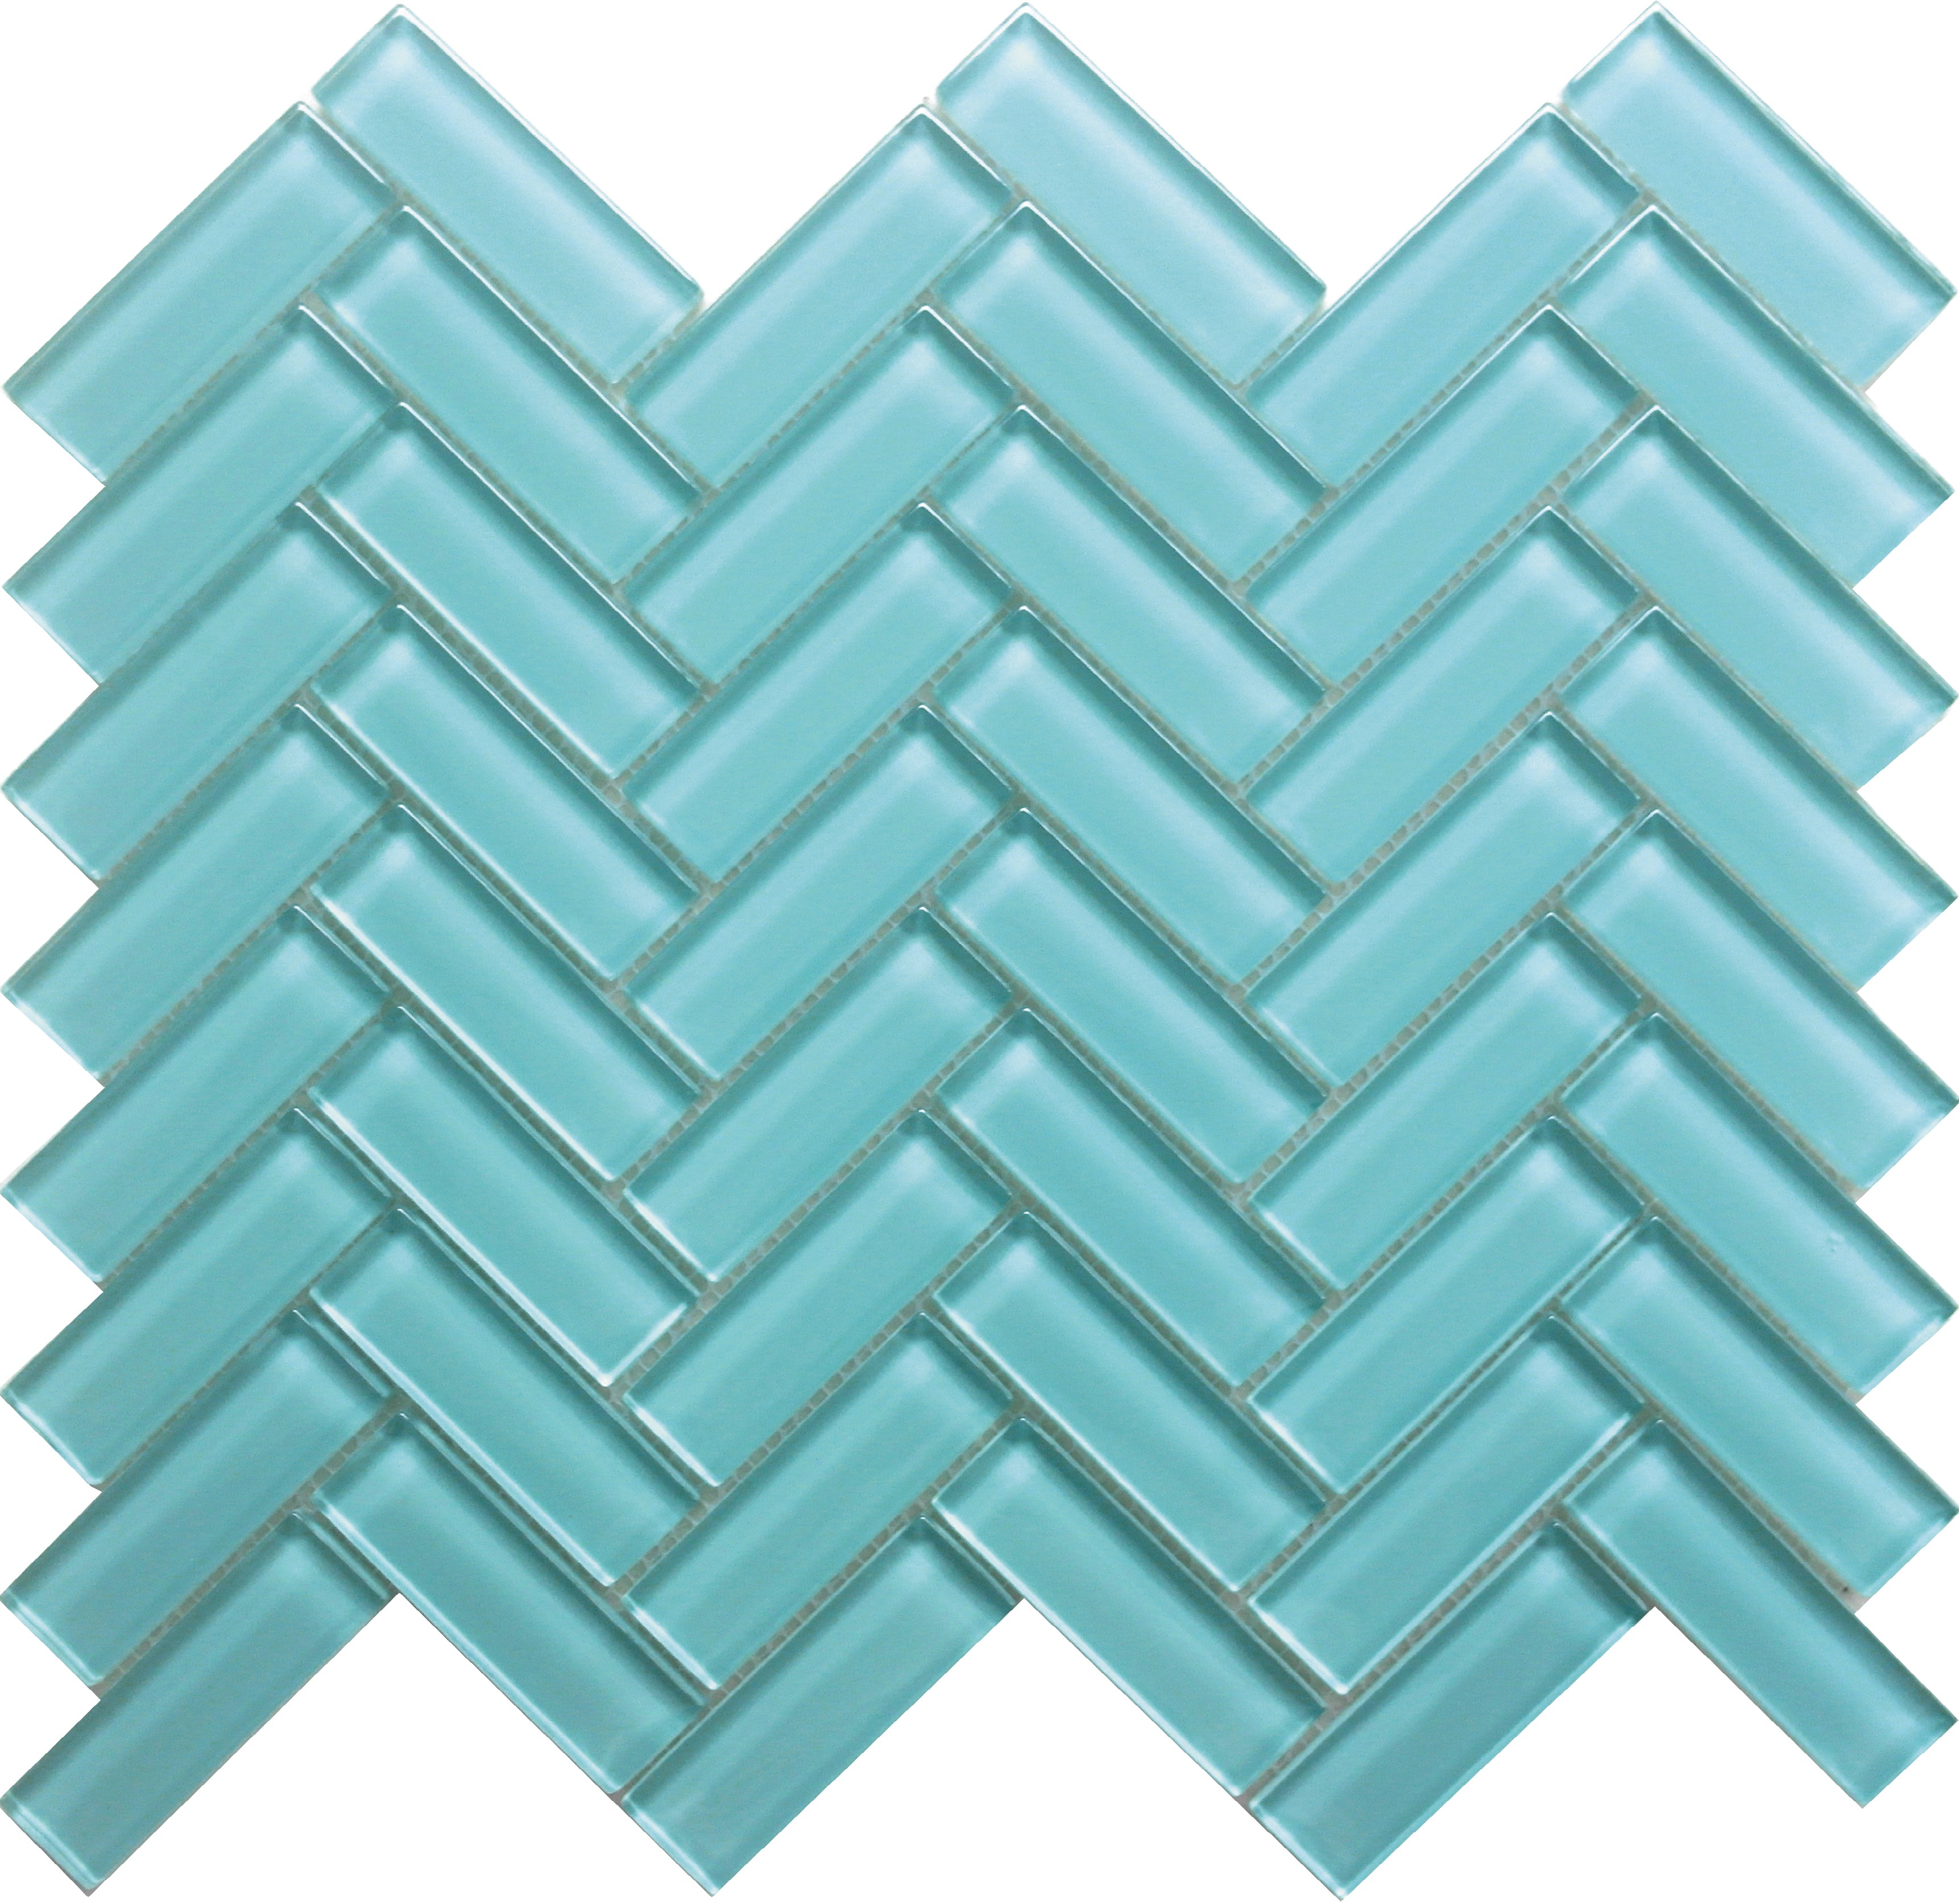 mir natural line color palette aqua 1x3 herringbone gloss wall and floor mosaic distributed by surface group natural materials